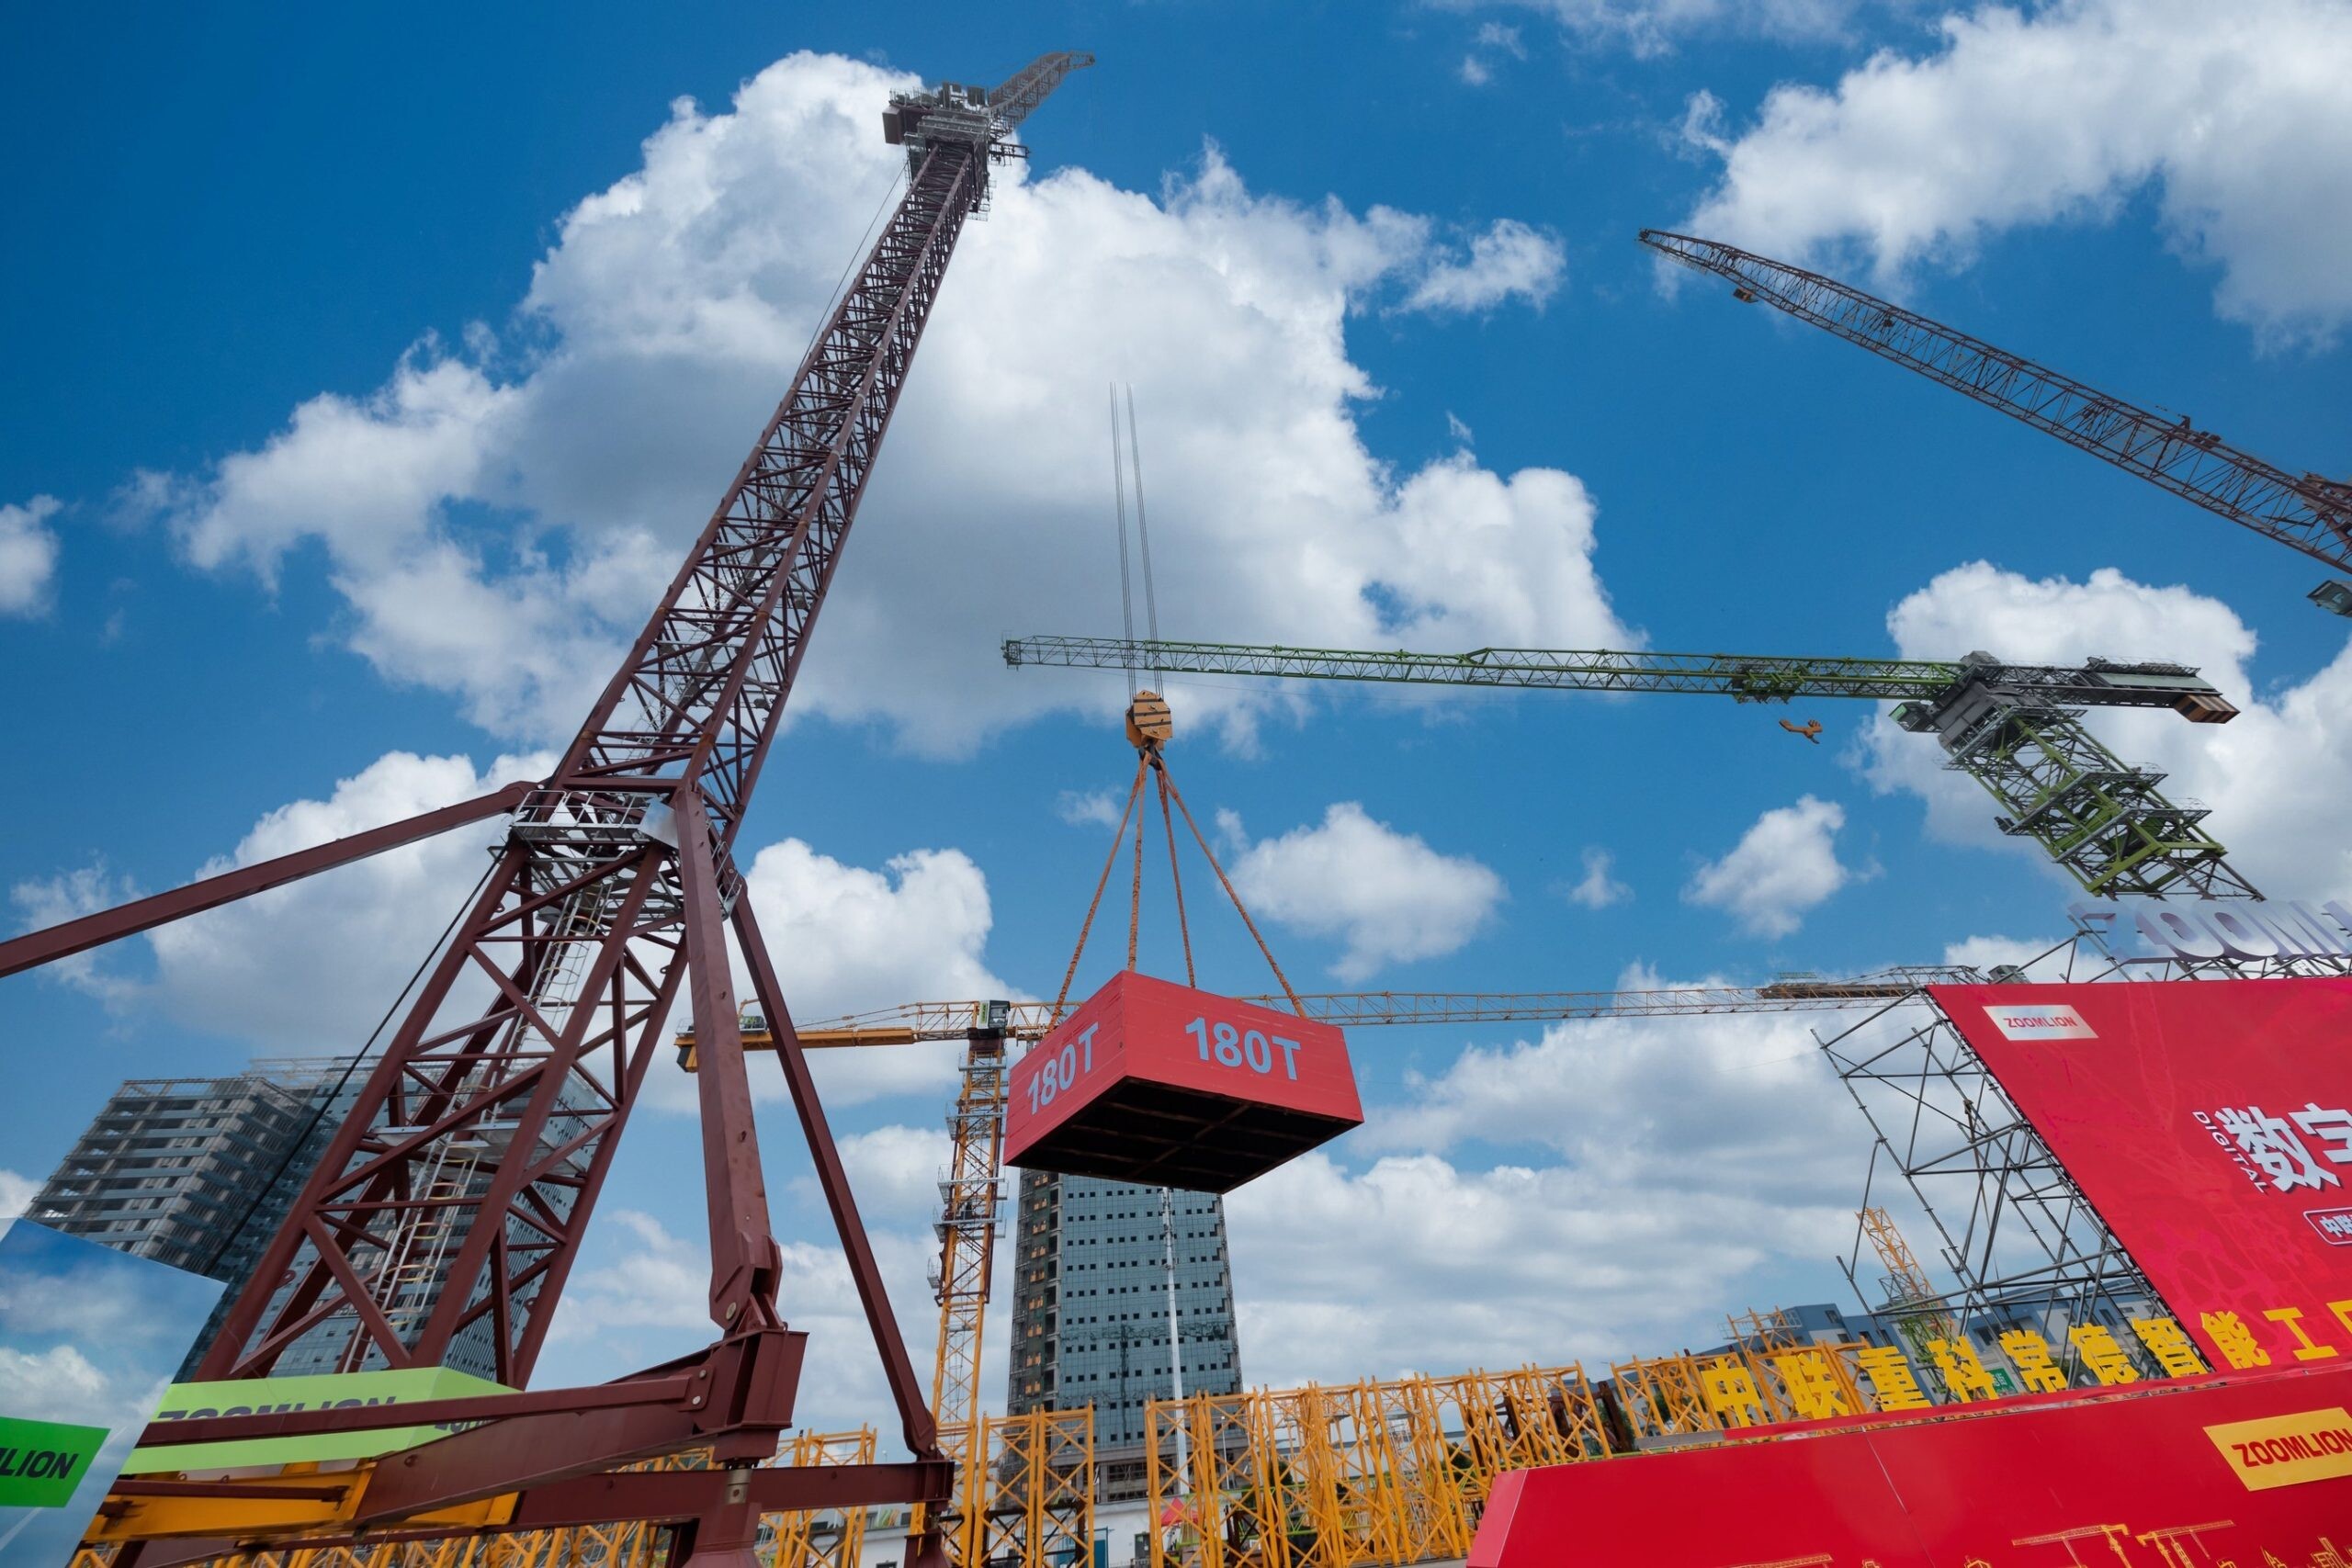 Xinhua Silk Road: Zoomlion's smart tower crane plant in Central China put into operation